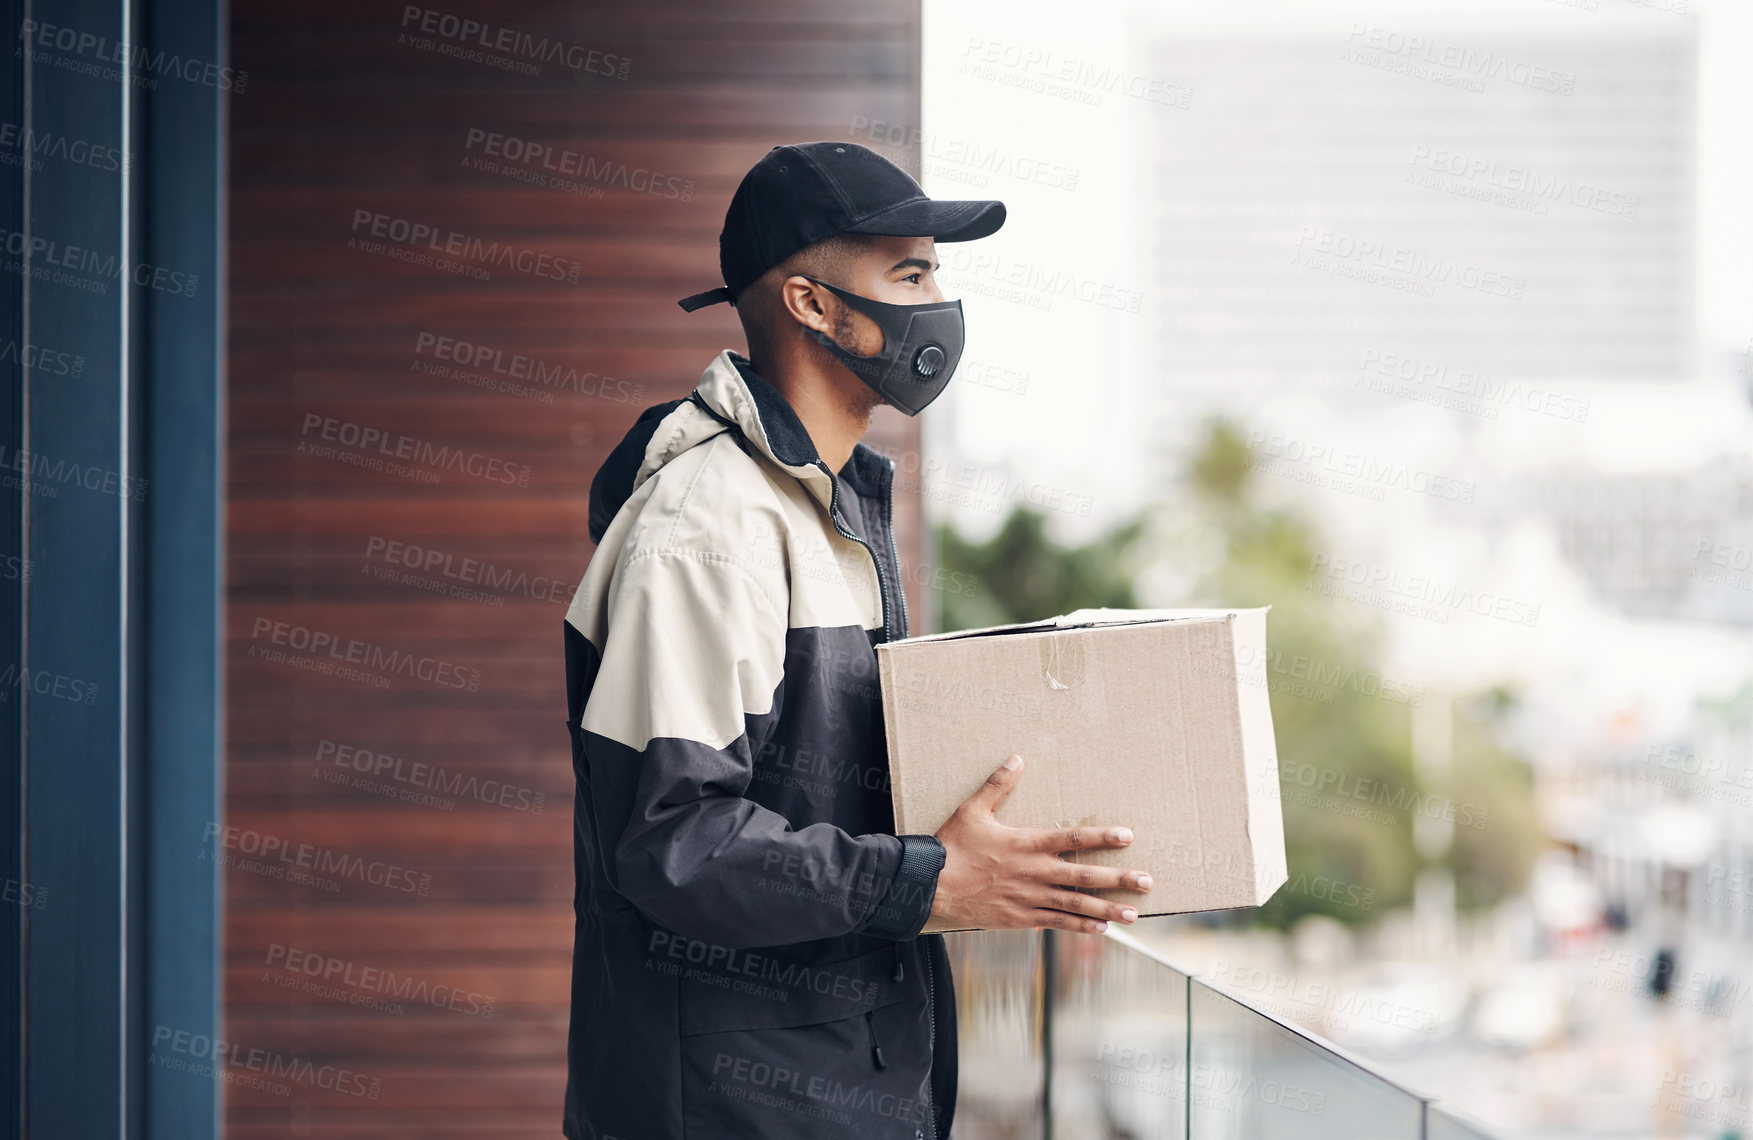 Buy stock photo Shot of a masked young man delivering a package to a place of residence